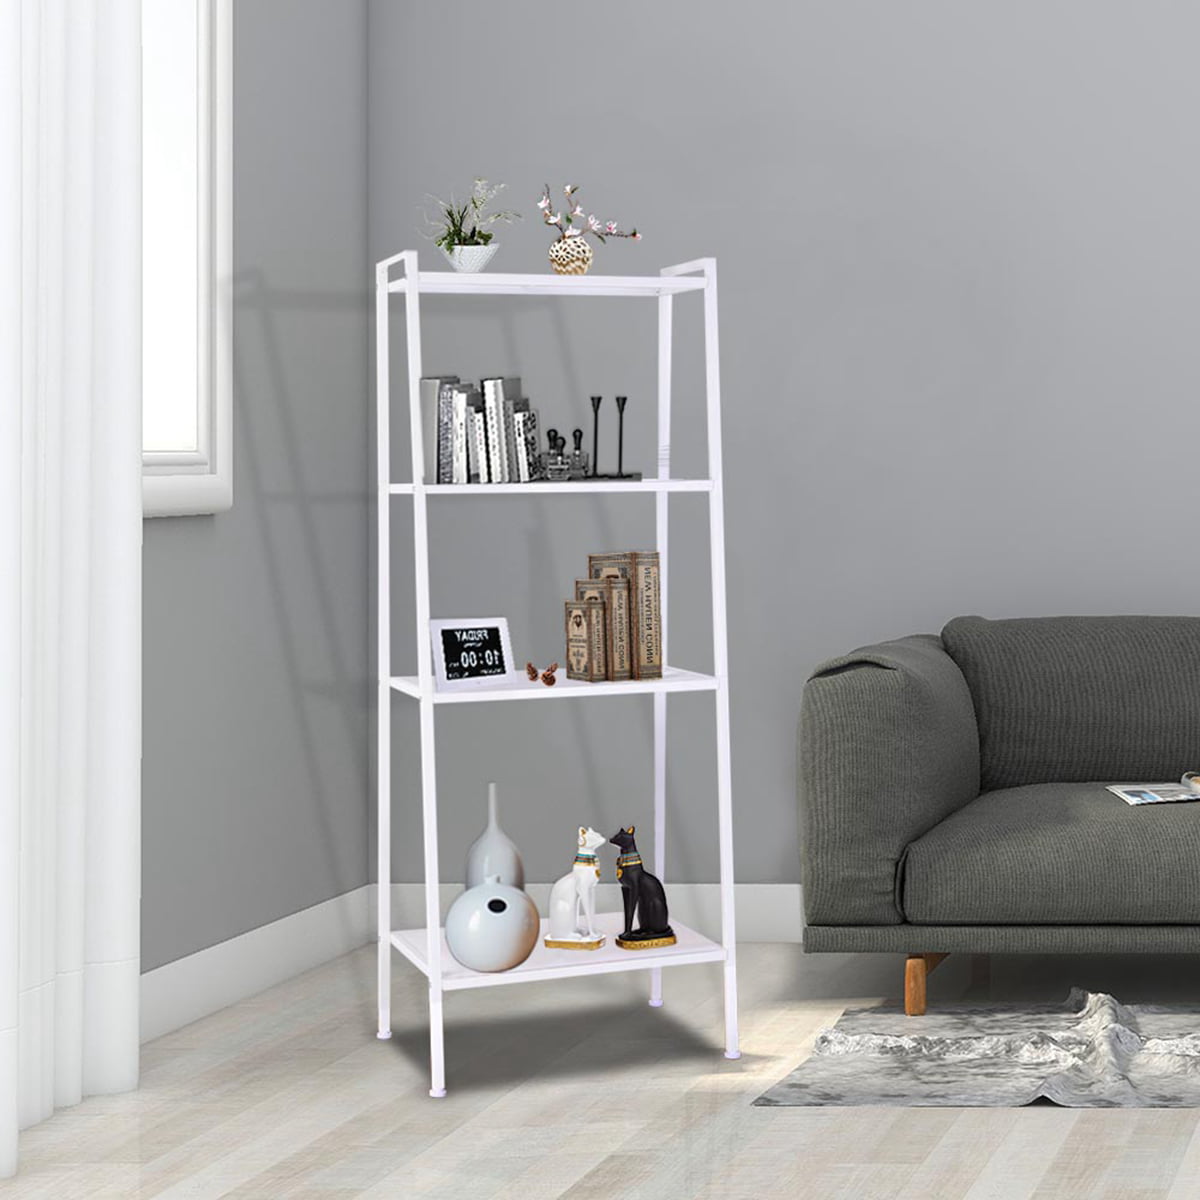 Plant Flower Display Stand Wood Look Storage Rack Bookshelf with Metal Frame Ideal for Bedroom Living Room Balcony Office White, 1 Tangkula 5-Tier Ladder Shelf Bookcase Against The Wall